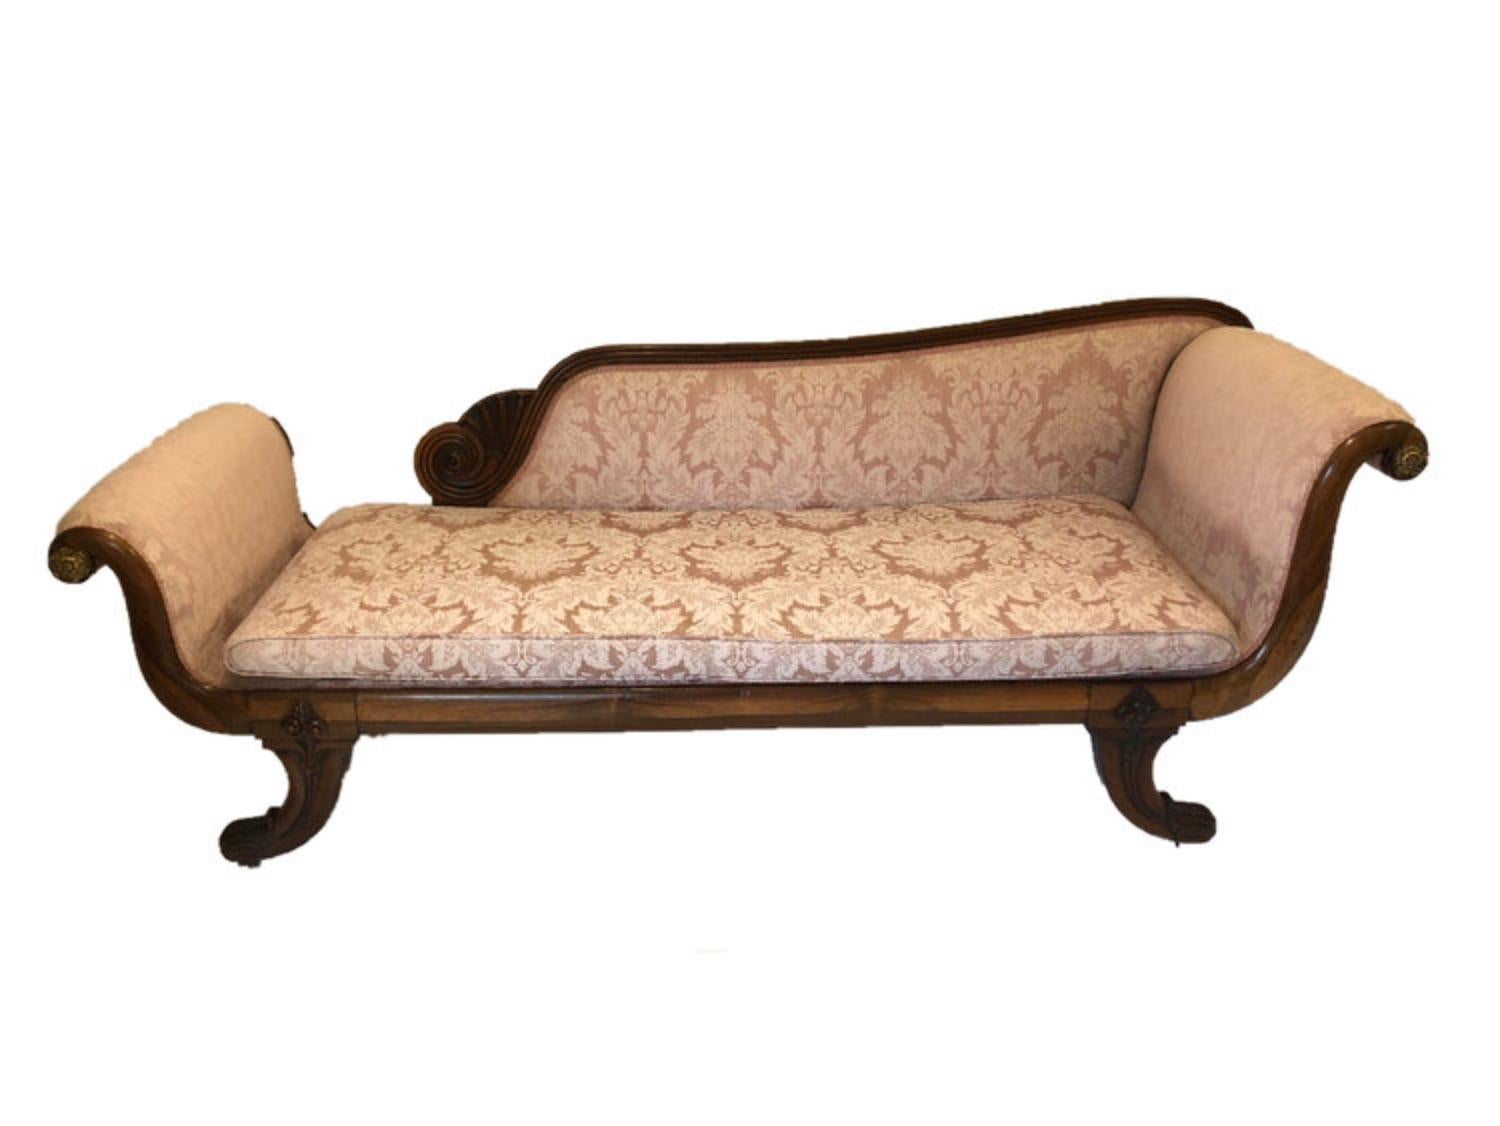 A fine Regency rosewood chaise or daybed with ormolu mounts and a classical scroll shape it does also have the roll end cushion which is missing in the photograph,

circa 1820-1840.


Measures: Chais 2100mm long

760mm high

700mm wide.